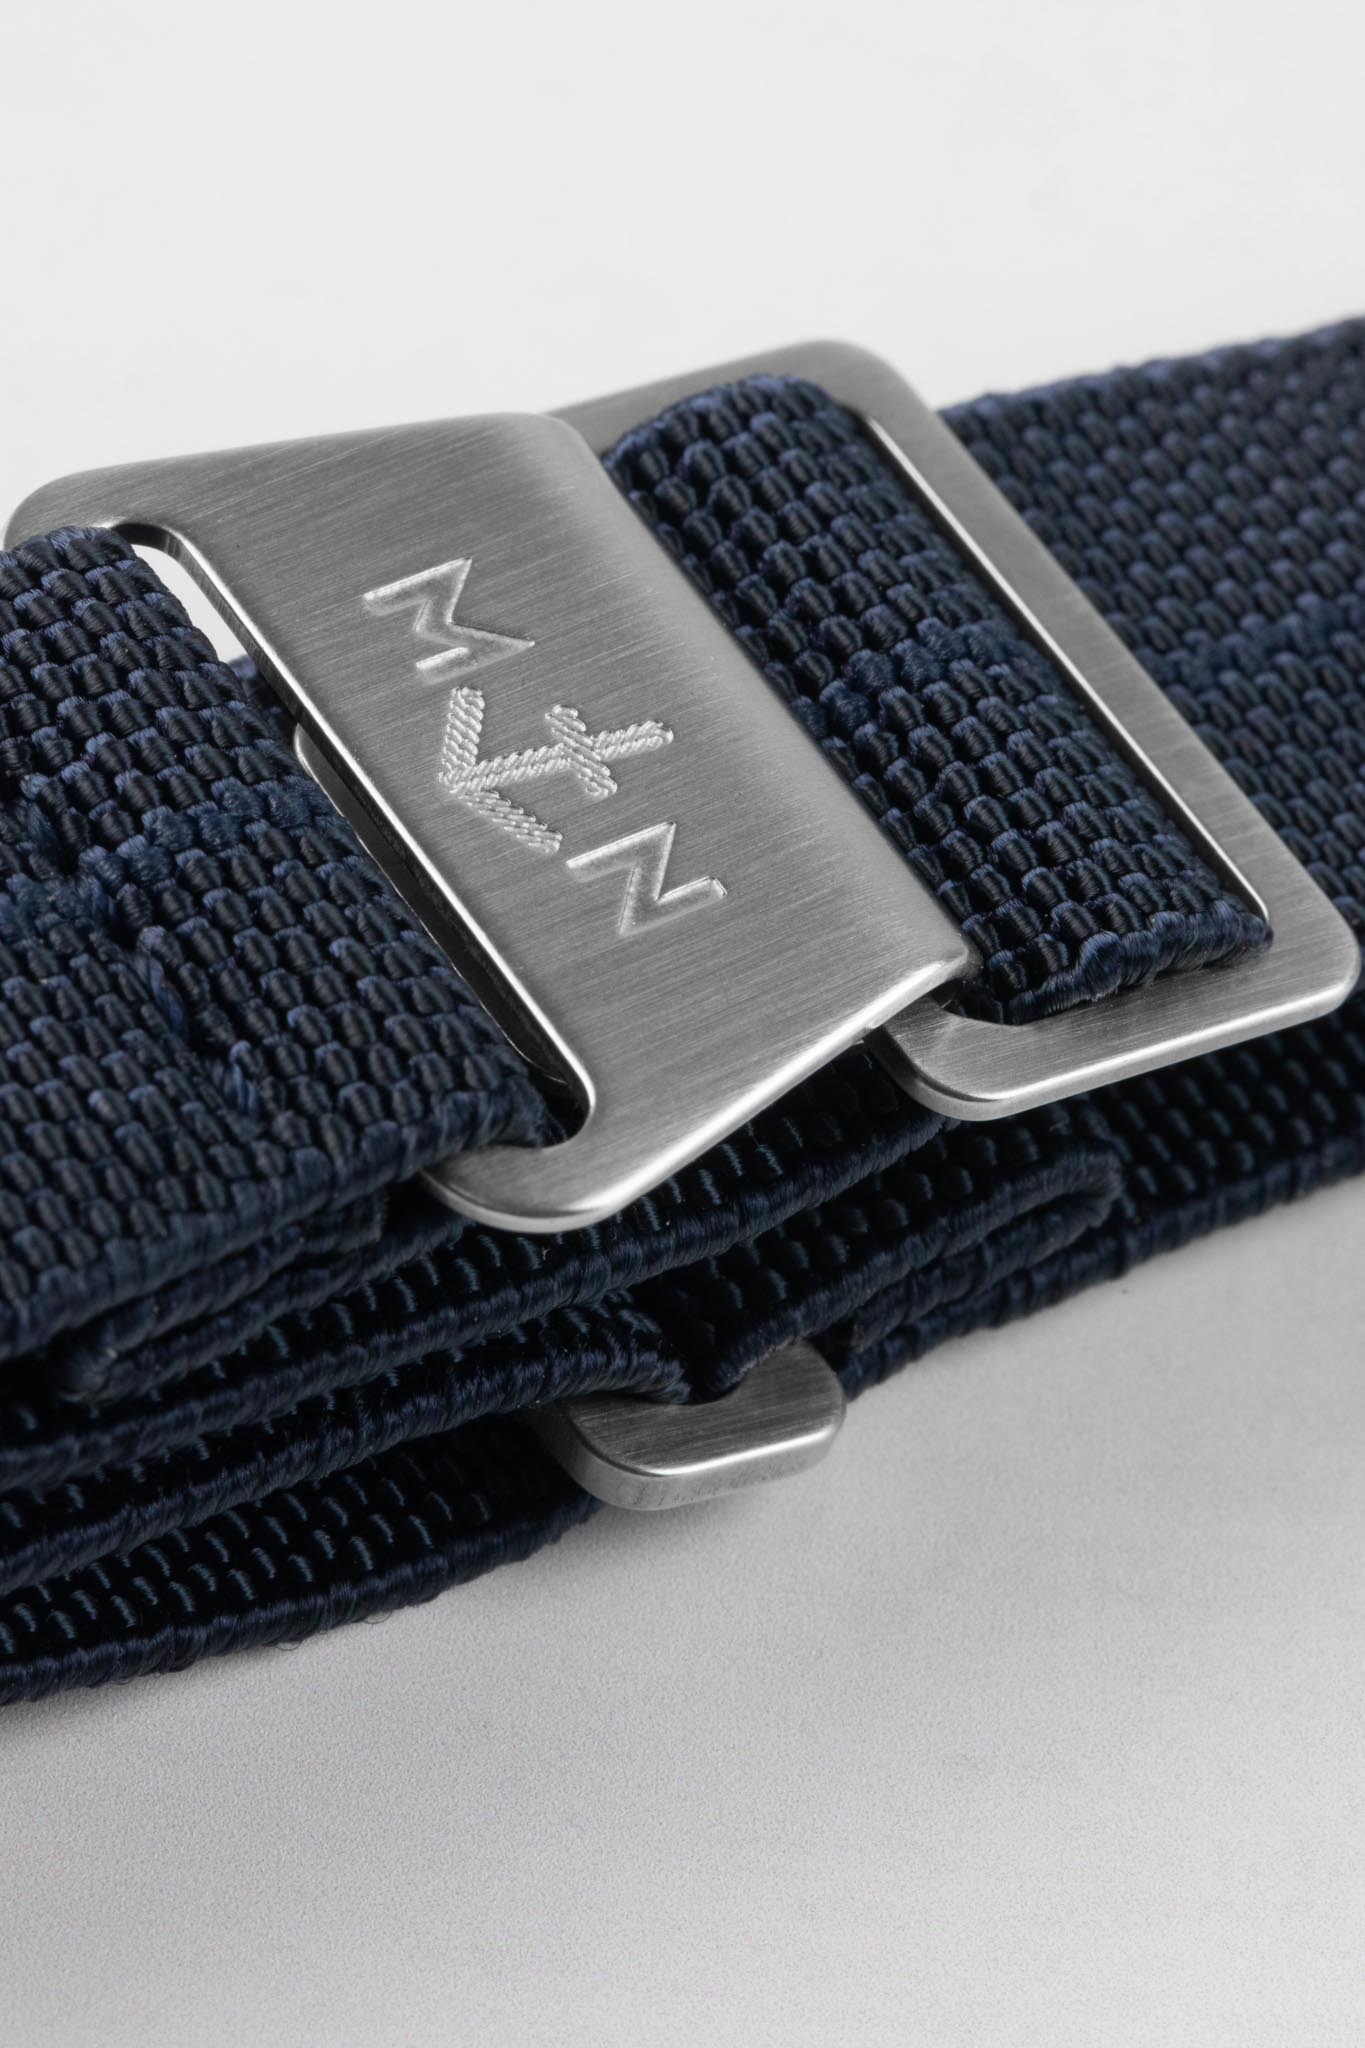 Erika's Originals TRIDENT MN Strap in TWO-TONE BLUE - BRUSHED Hardware ...